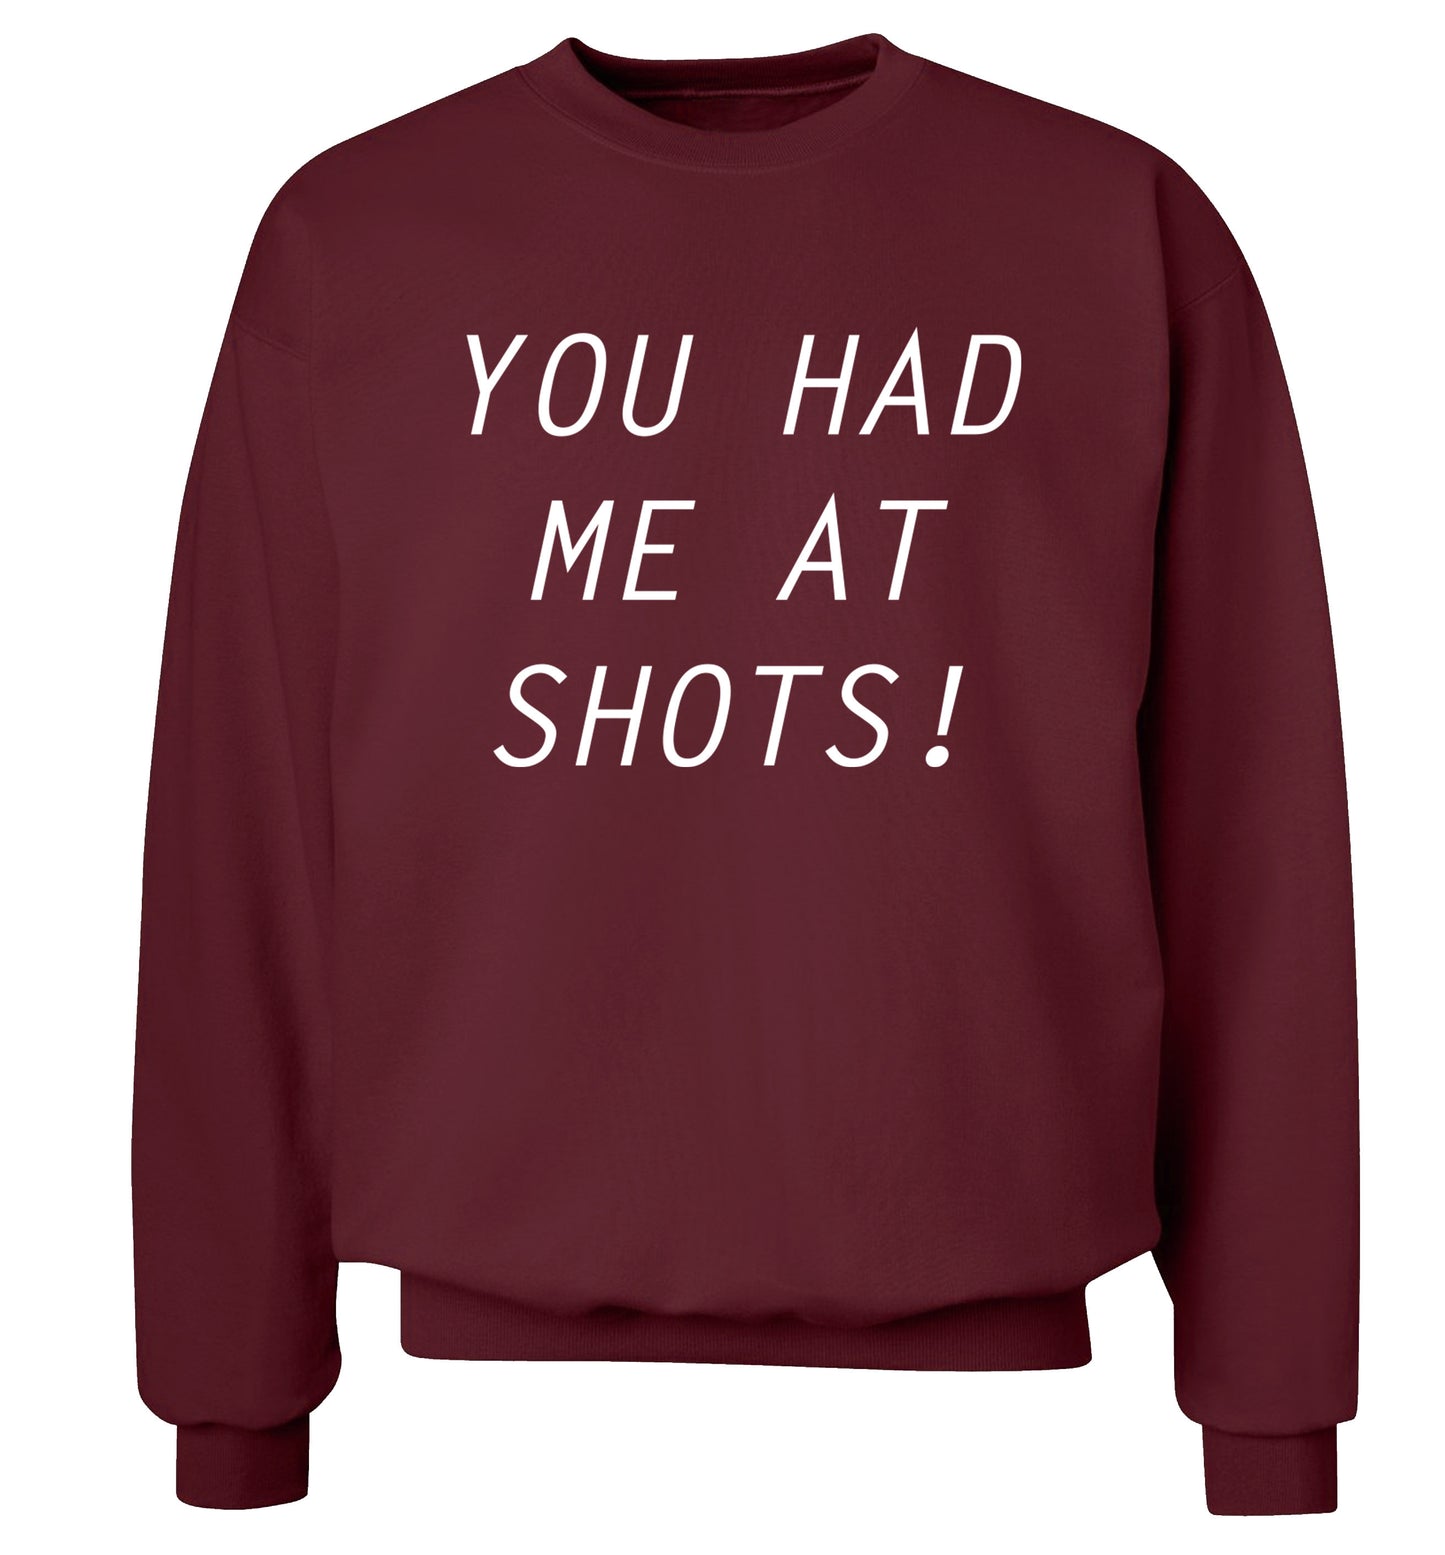 You had me at shots Adult's unisex maroon Sweater 2XL